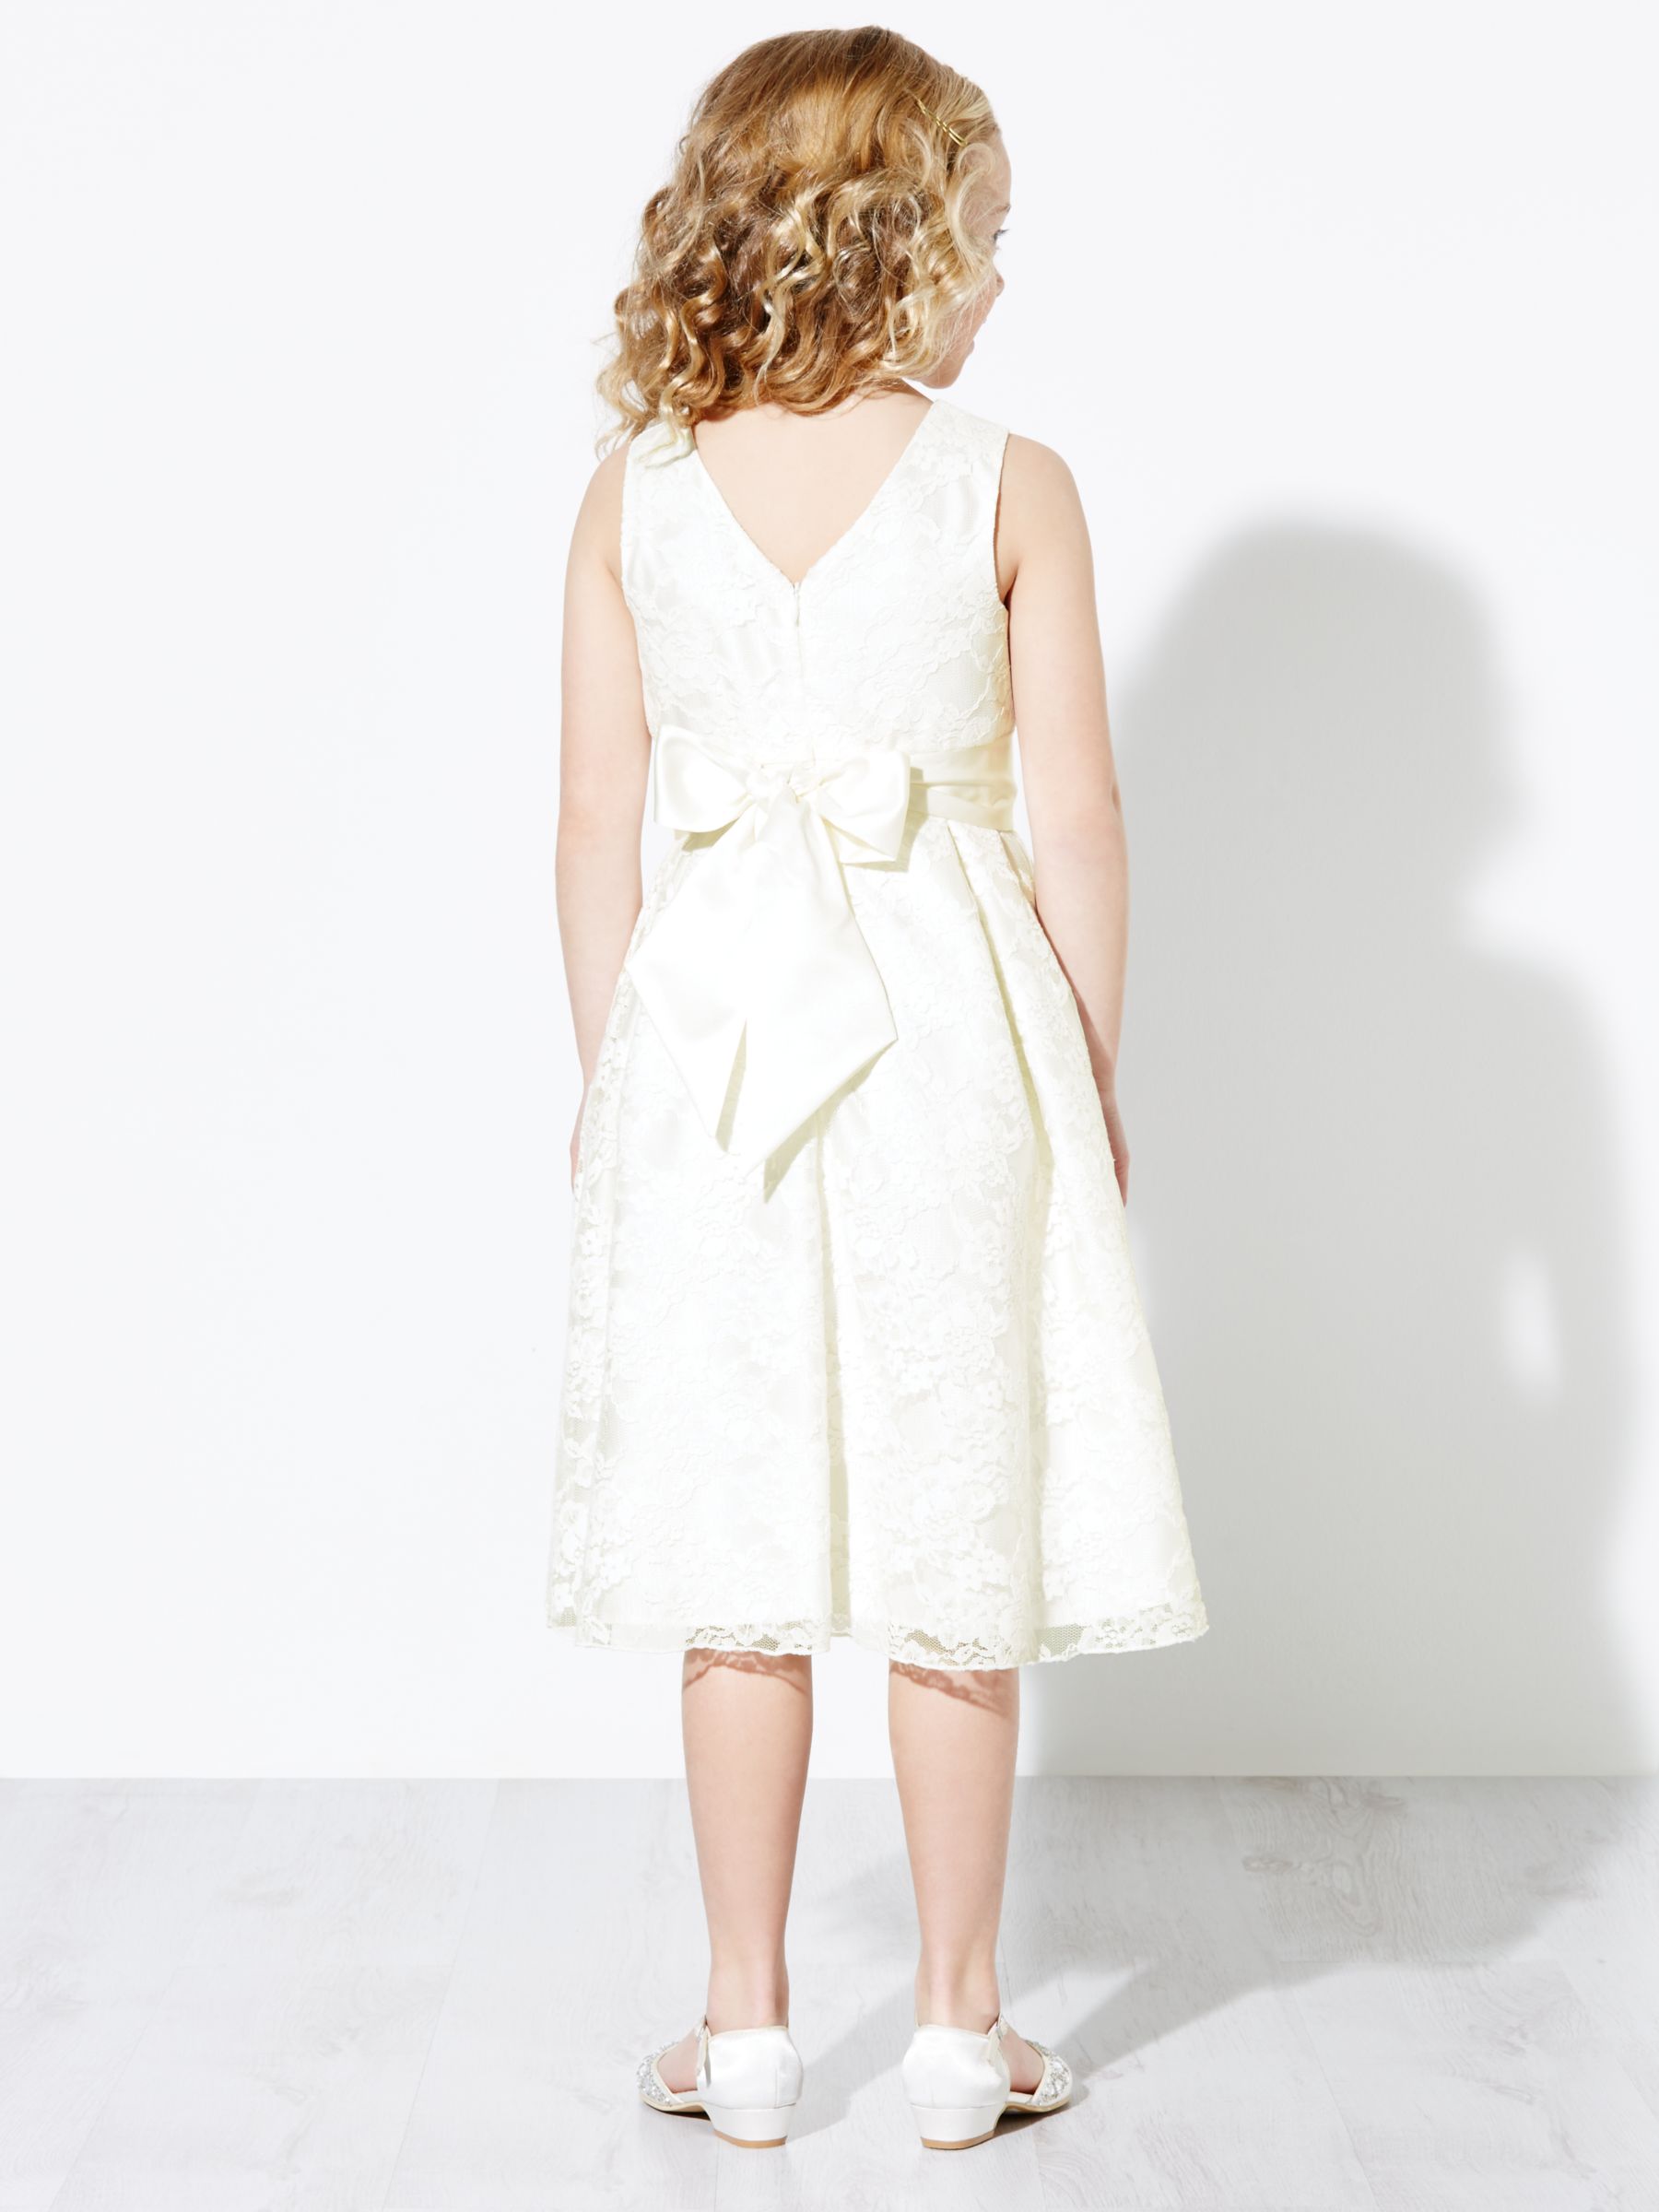 Buy John Lewis Heirloom Collection Kids' Charlotte Lace Bridesmaid Dress, Ivory Online at johnlewis.com